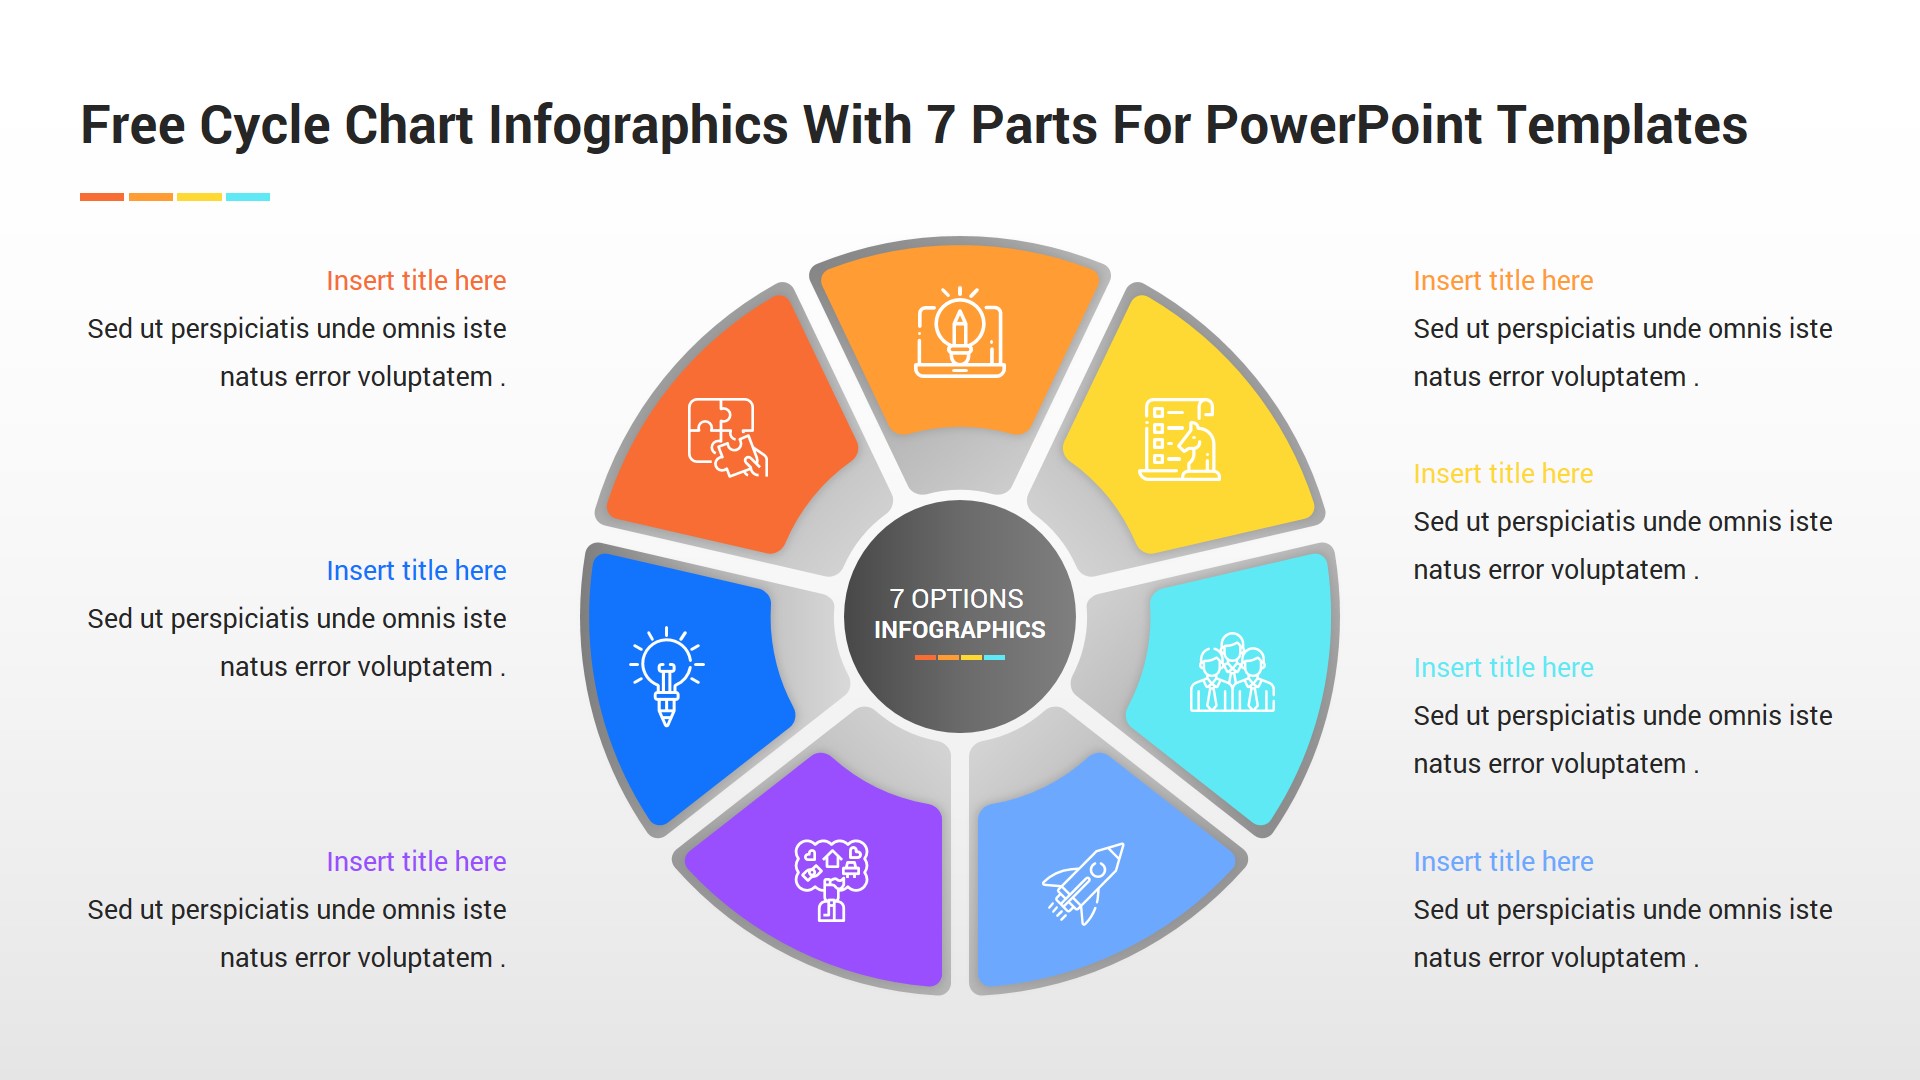 Free Cycle Chart Infographics With 7 Parts For PowerPoint Templates